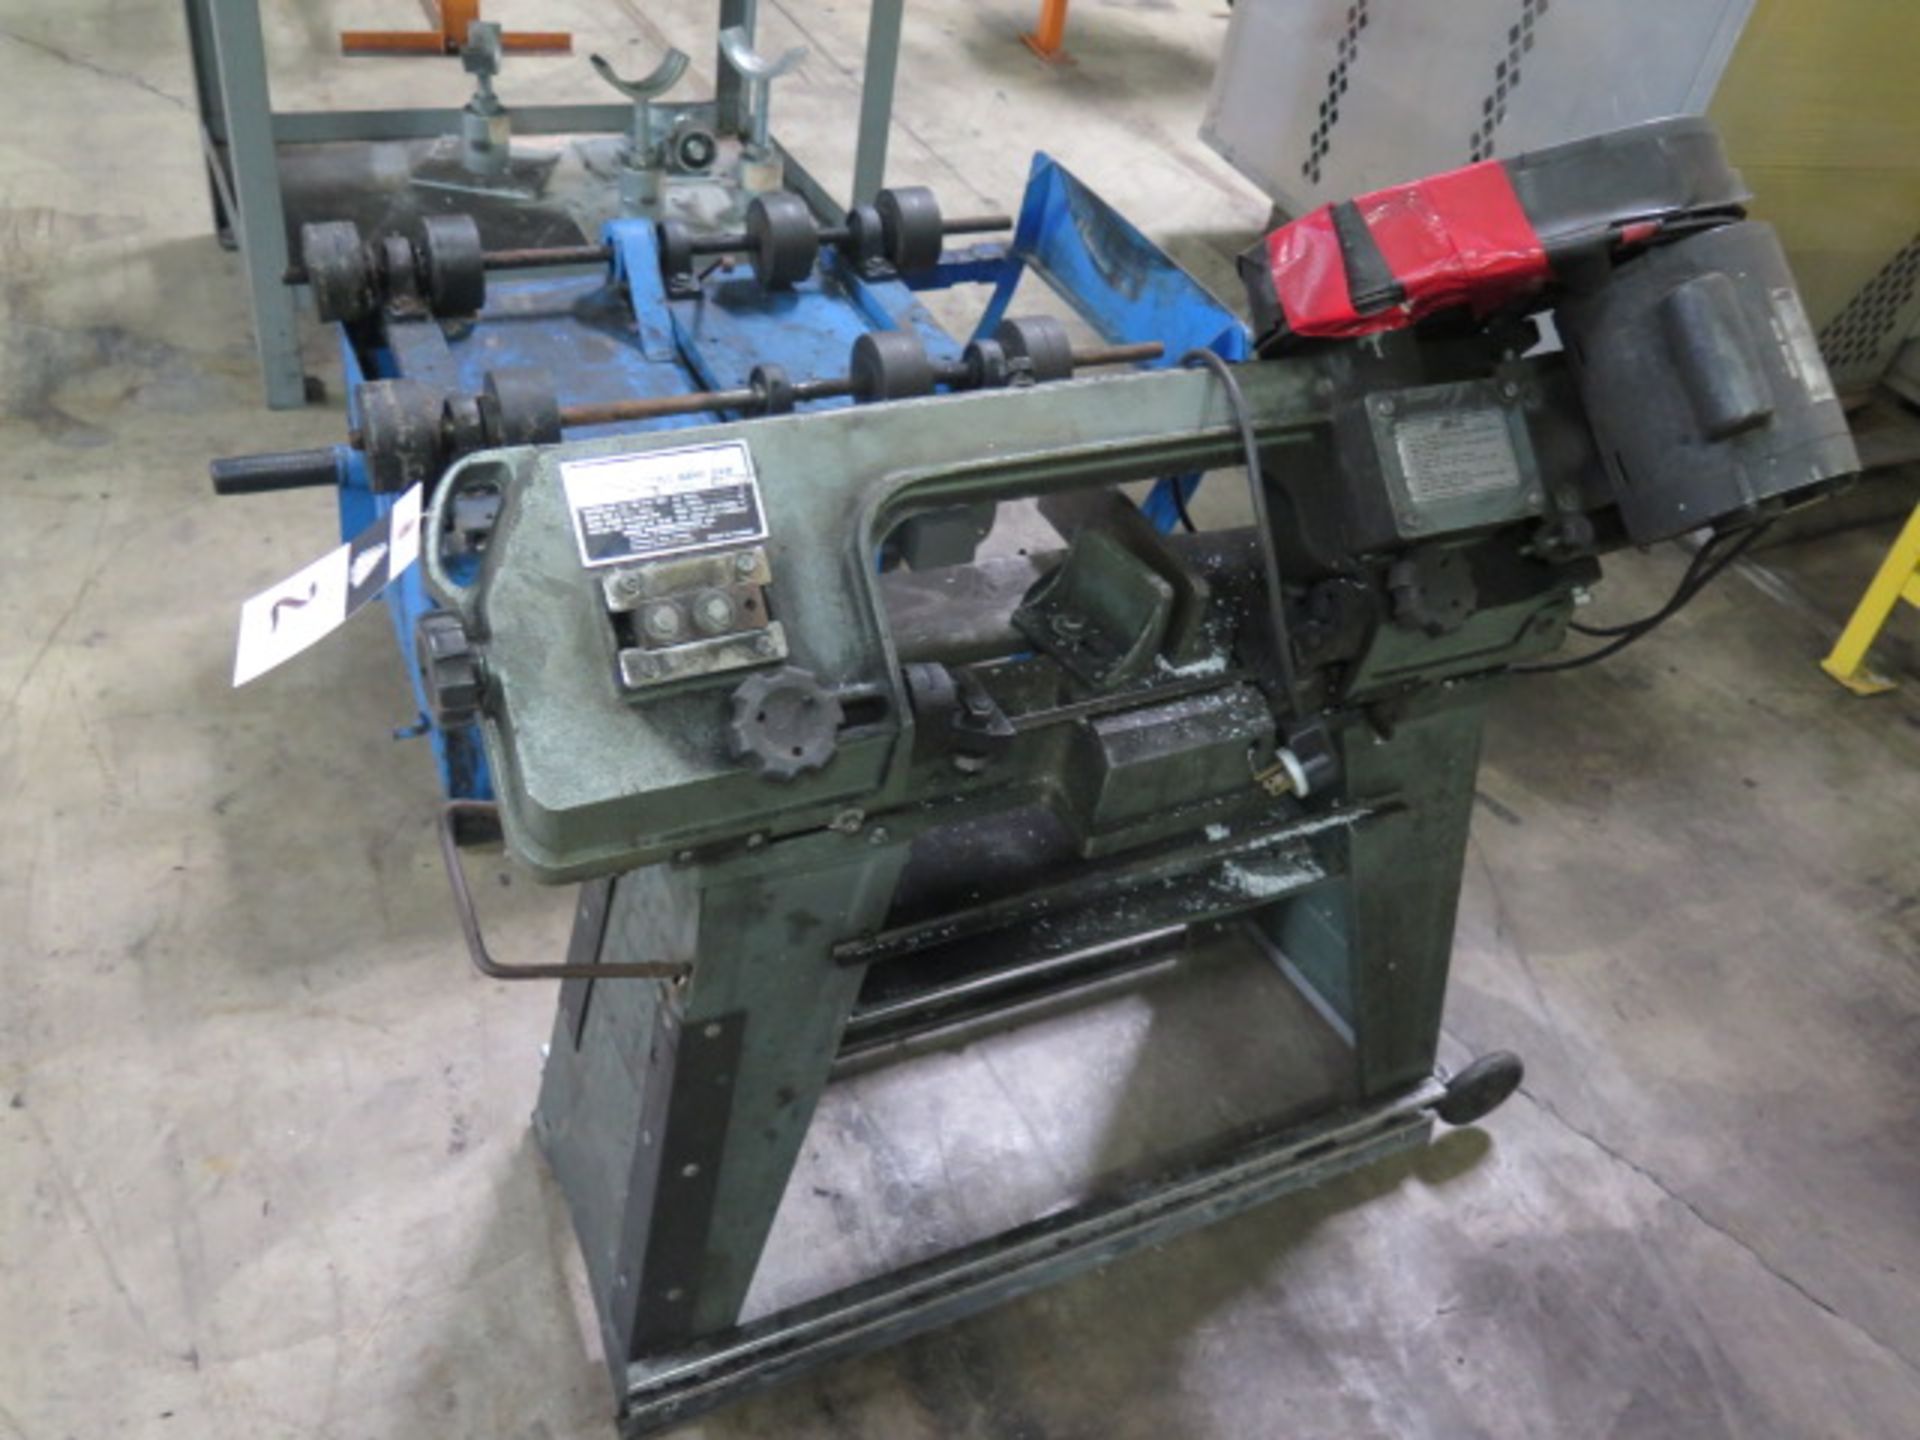 Enco 4” Metal Cutting Band Saw s/n 551538, SOLD AS IS WITH NO WARRANTY